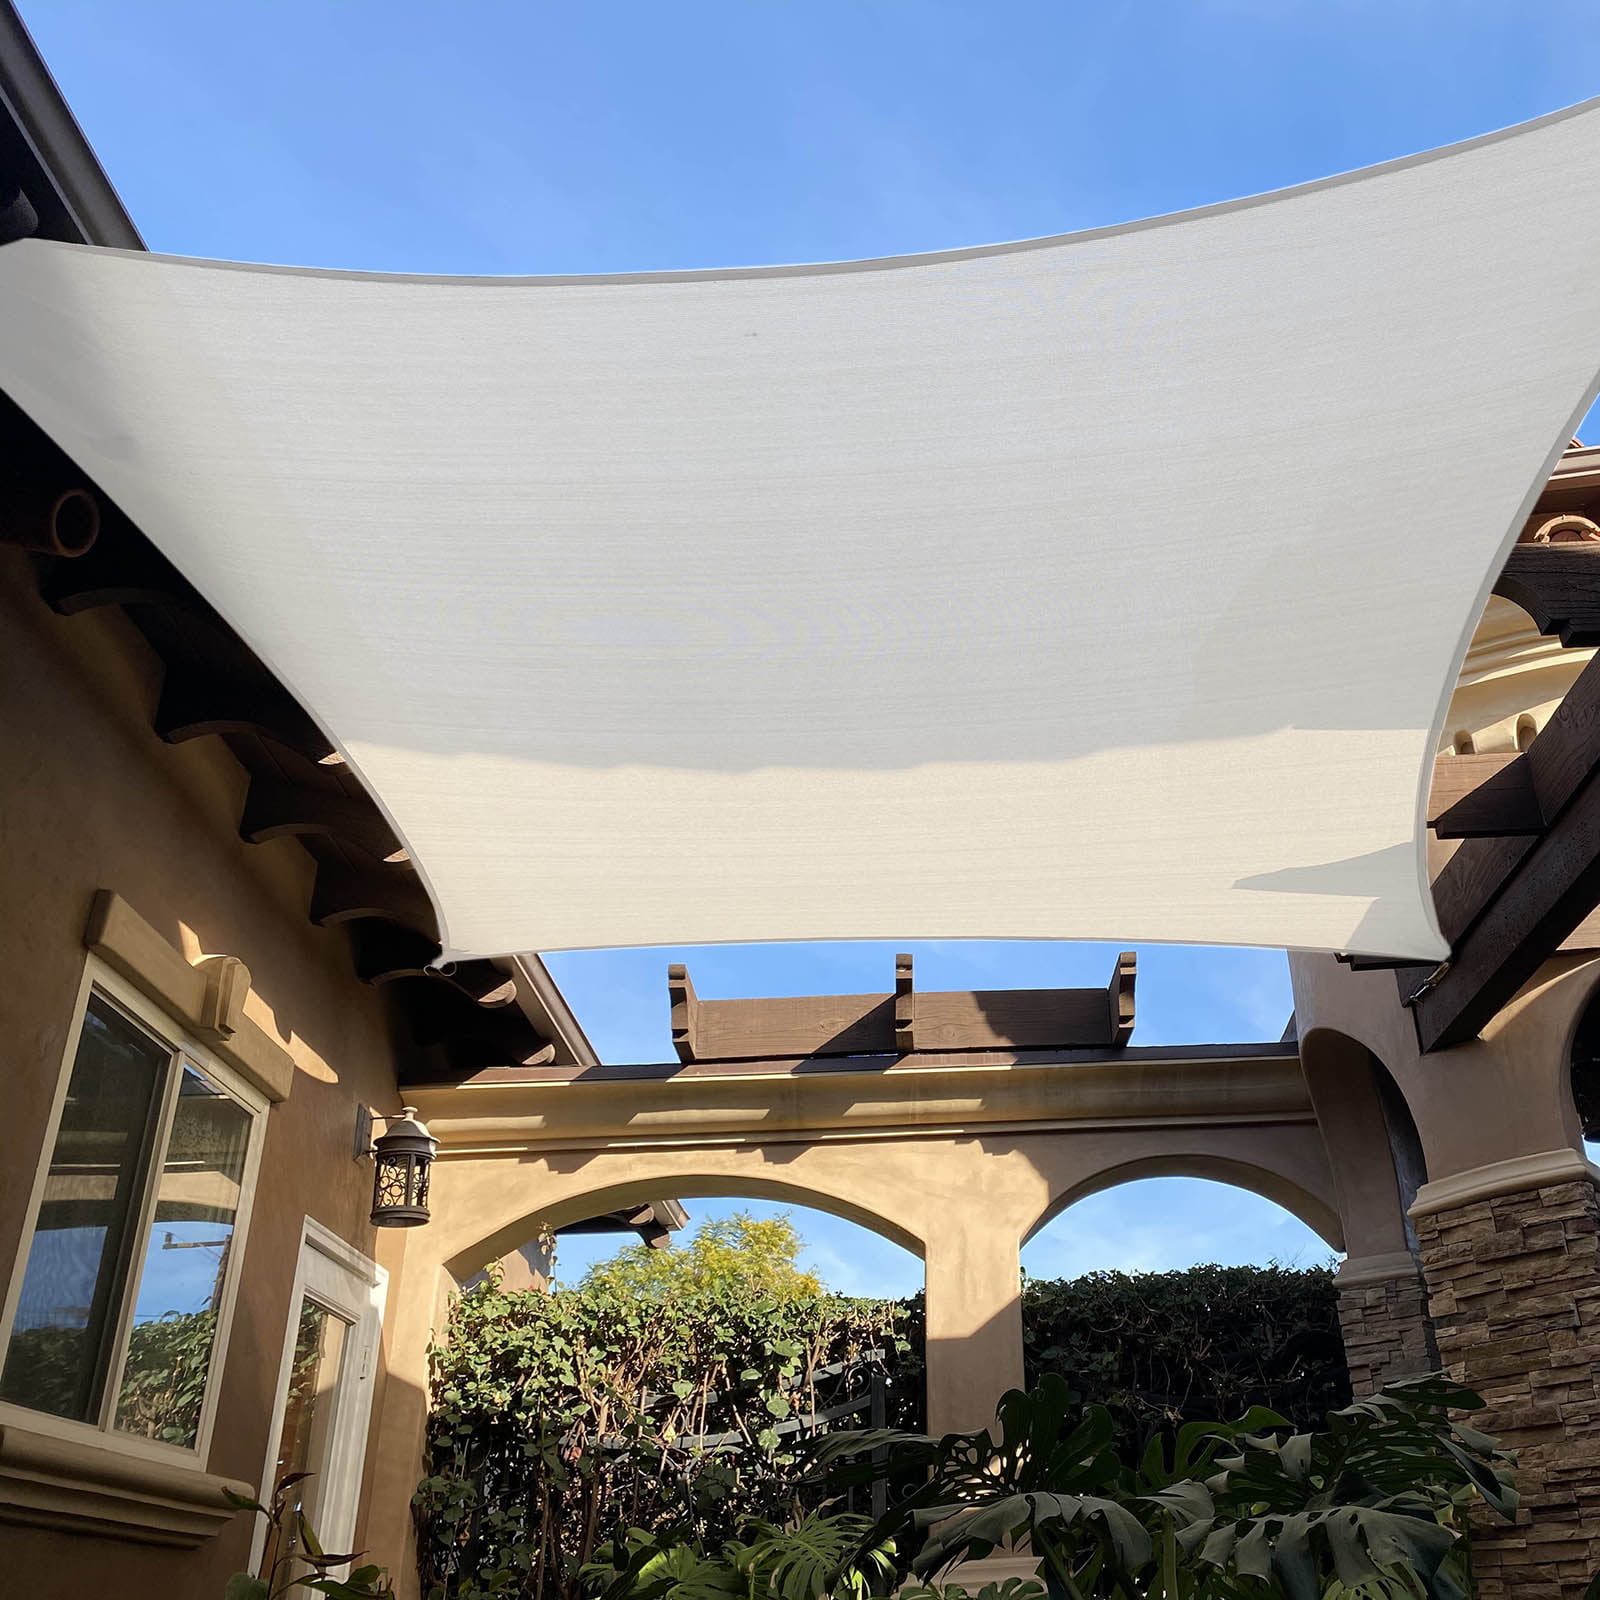 Details about   Sun Shade Sail 10x10Ft 97% UV Block Square Canopy Outdoor Patio Pool Rice White 